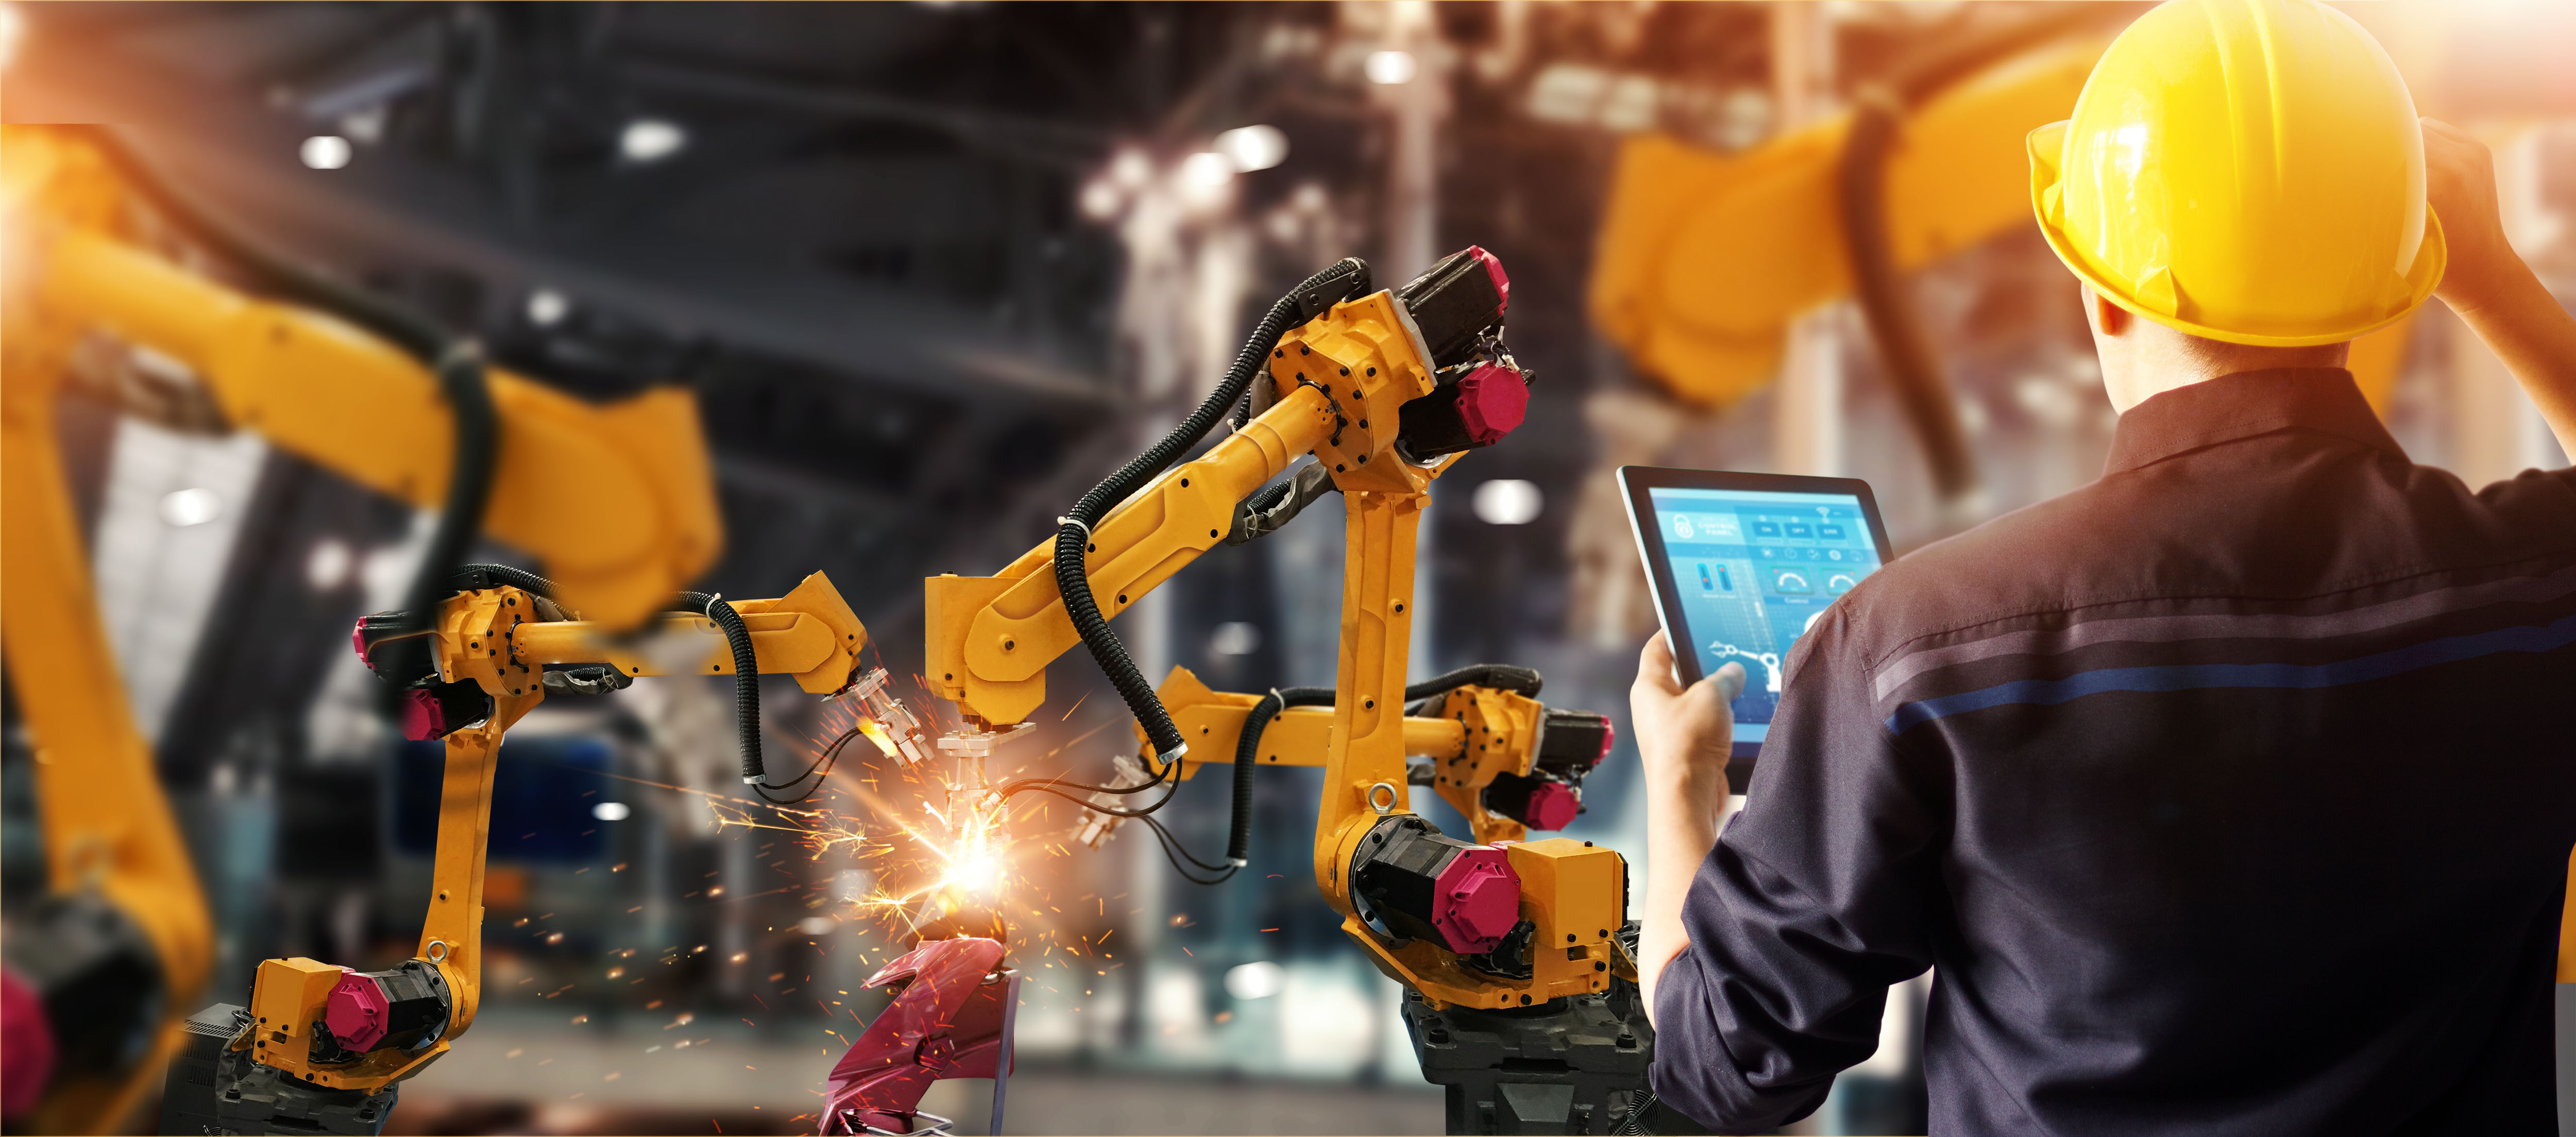 image for Advanced Robotics in Manufacturing Webinar June 17th